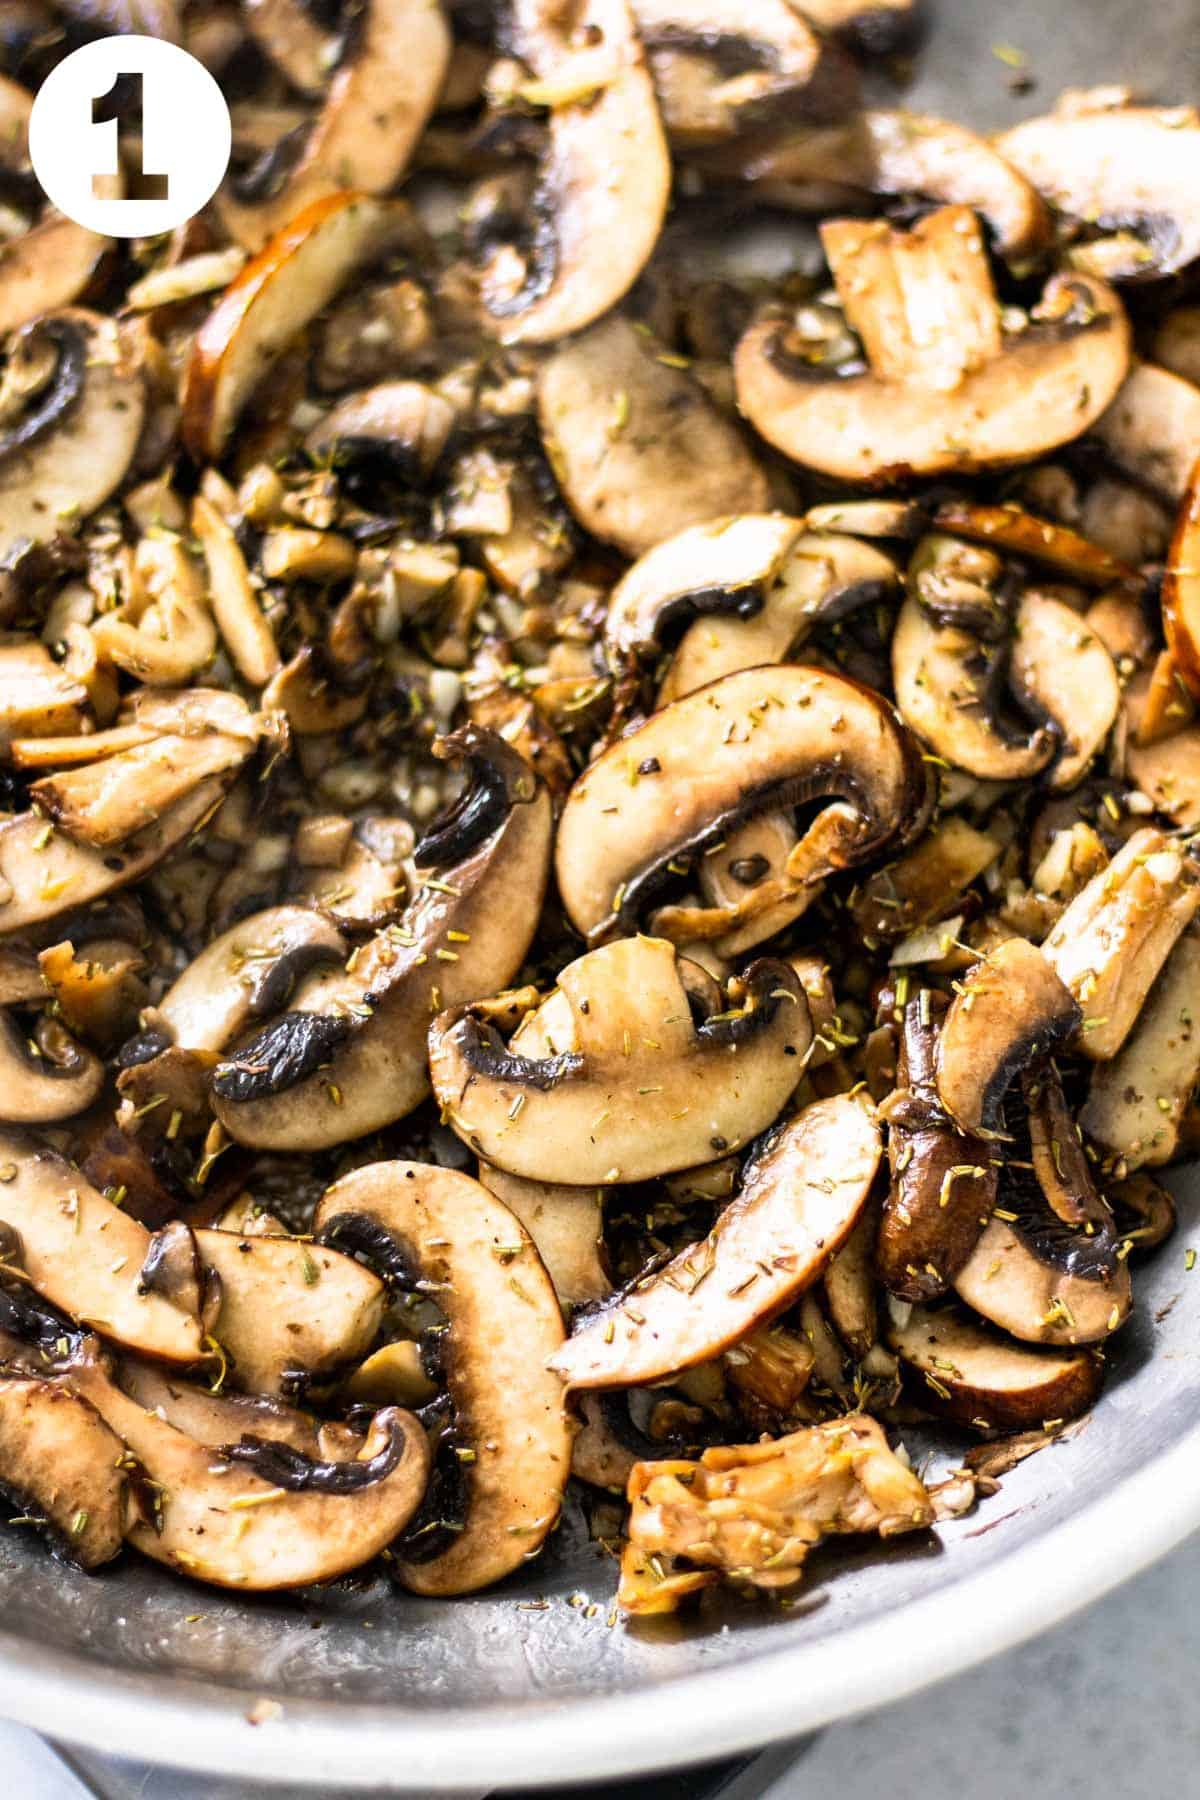 Sliced mushrooms with rosemary and thyme cooking in a skillet.